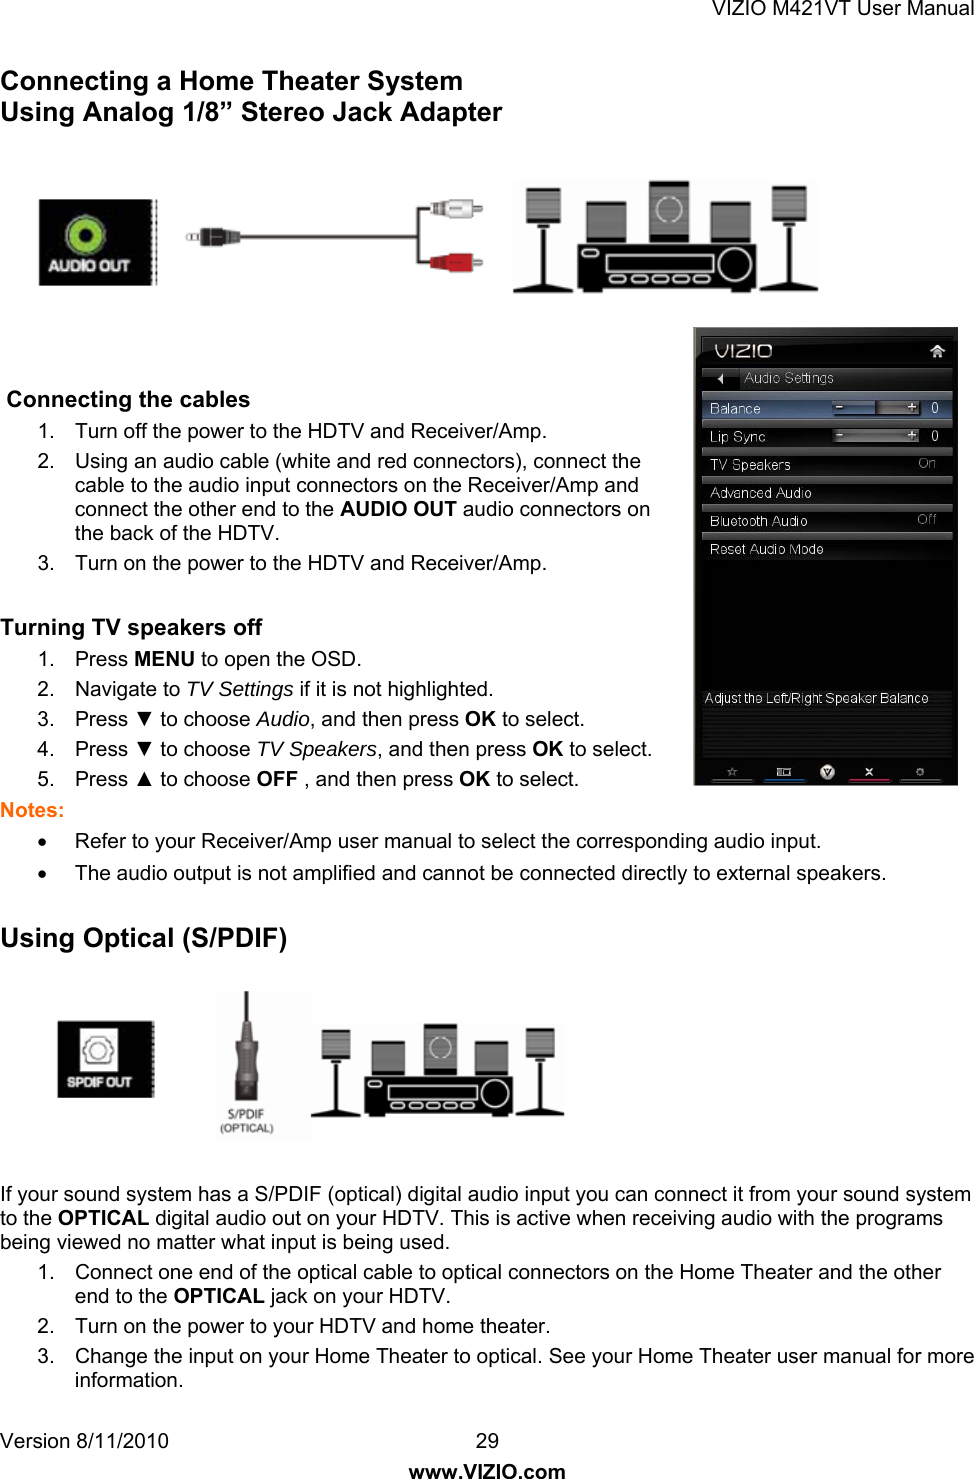 VIZIO M421VT User Manual Version 8/11/2010  29   www.VIZIO.com Connecting a Home Theater System Using Analog 1/8” Stereo Jack Adapter                          Connecting the cables 1.  Turn off the power to the HDTV and Receiver/Amp. 2.  Using an audio cable (white and red connectors), connect the cable to the audio input connectors on the Receiver/Amp and connect the other end to the AUDIO OUT audio connectors on the back of the HDTV. 3.  Turn on the power to the HDTV and Receiver/Amp.  Turning TV speakers off 1. Press MENU to open the OSD. 2. Navigate to TV Settings if it is not highlighted. 3. Press ▼ to choose Audio, and then press OK to select. 4. Press ▼ to choose TV Speakers, and then press OK to select. 5. Press ▲ to choose OFF , and then press OK to select. Notes: •  Refer to your Receiver/Amp user manual to select the corresponding audio input. •  The audio output is not amplified and cannot be connected directly to external speakers.  Using Optical (S/PDIF)        If your sound system has a S/PDIF (optical) digital audio input you can connect it from your sound system to the OPTICAL digital audio out on your HDTV. This is active when receiving audio with the programs being viewed no matter what input is being used. 1.  Connect one end of the optical cable to optical connectors on the Home Theater and the other end to the OPTICAL jack on your HDTV. 2.  Turn on the power to your HDTV and home theater. 3.  Change the input on your Home Theater to optical. See your Home Theater user manual for more information. 